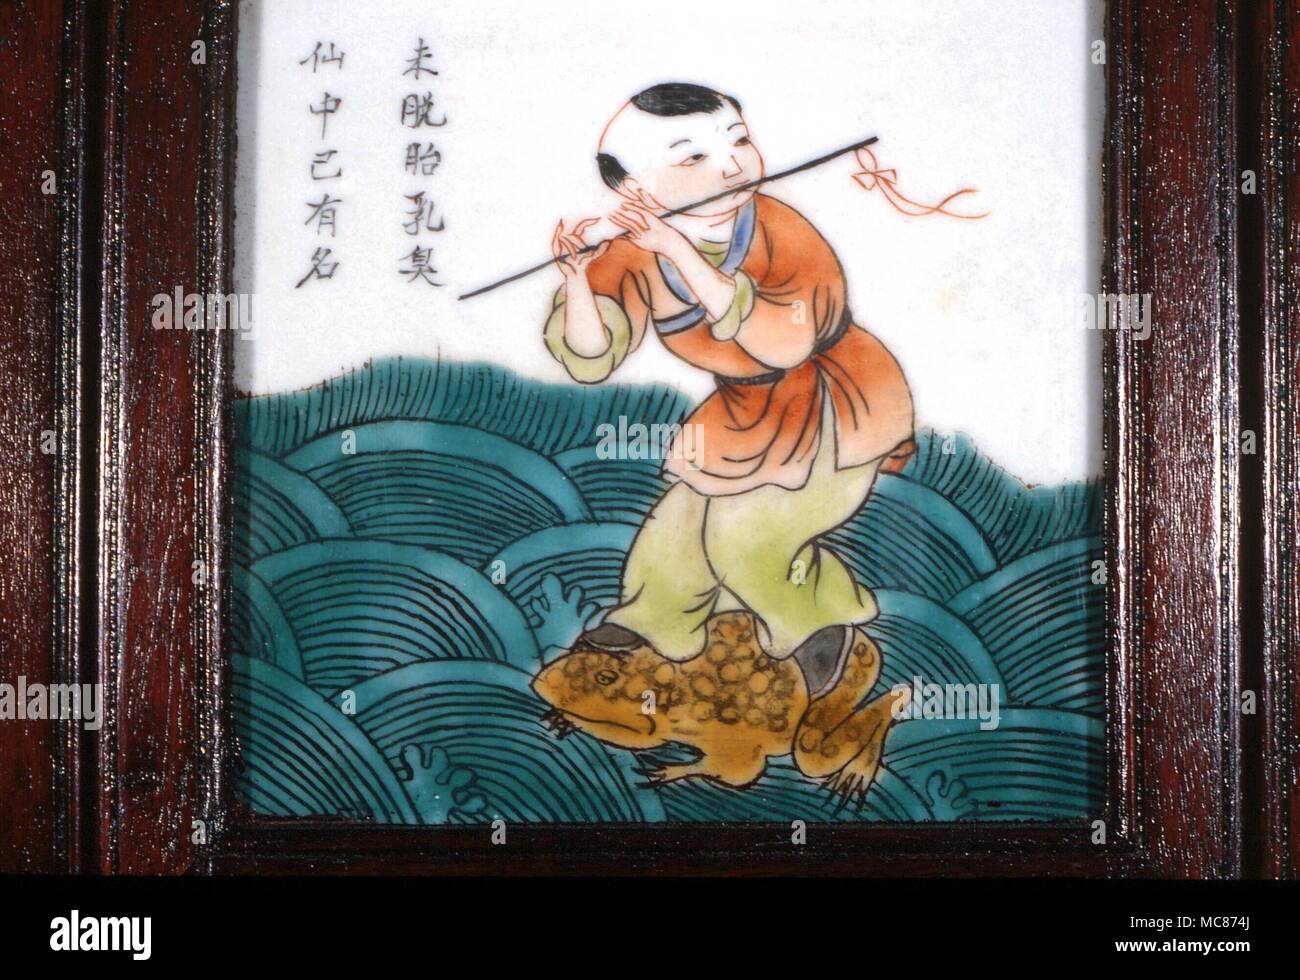 Taoism - One of the Taoist 'Eight Immortals- (Pa Hsien). Han Hsiang-tzu, standing on a frog and playing a flute. Mid-19th century Chinese tile, from a screen Stock Photo